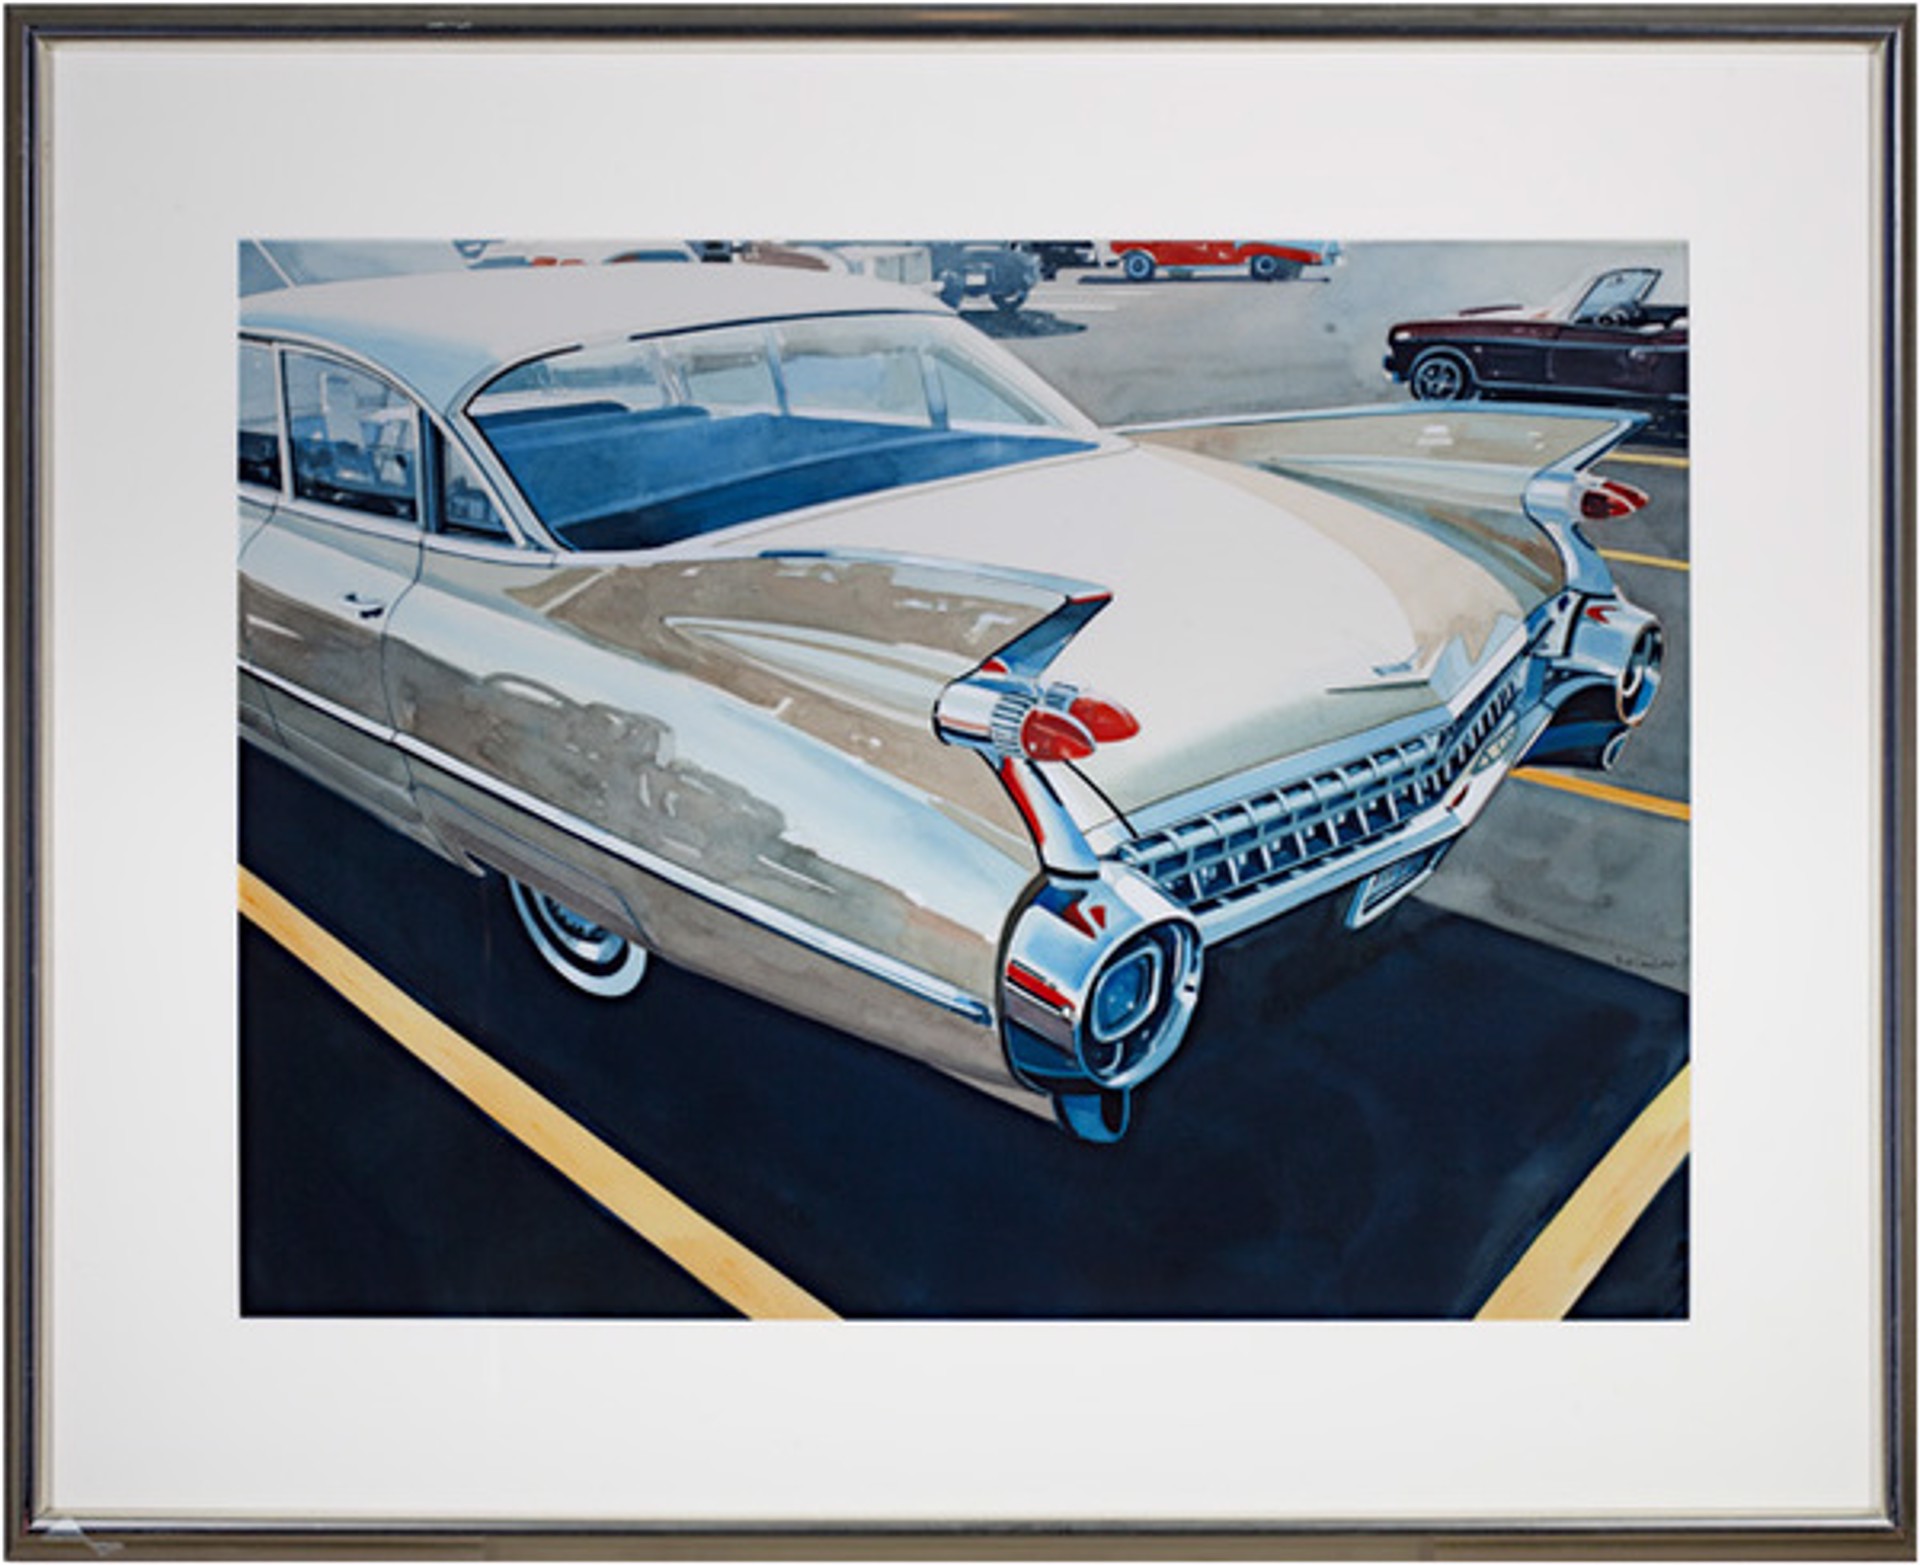 '59 Cadillac by Bruce McCombs